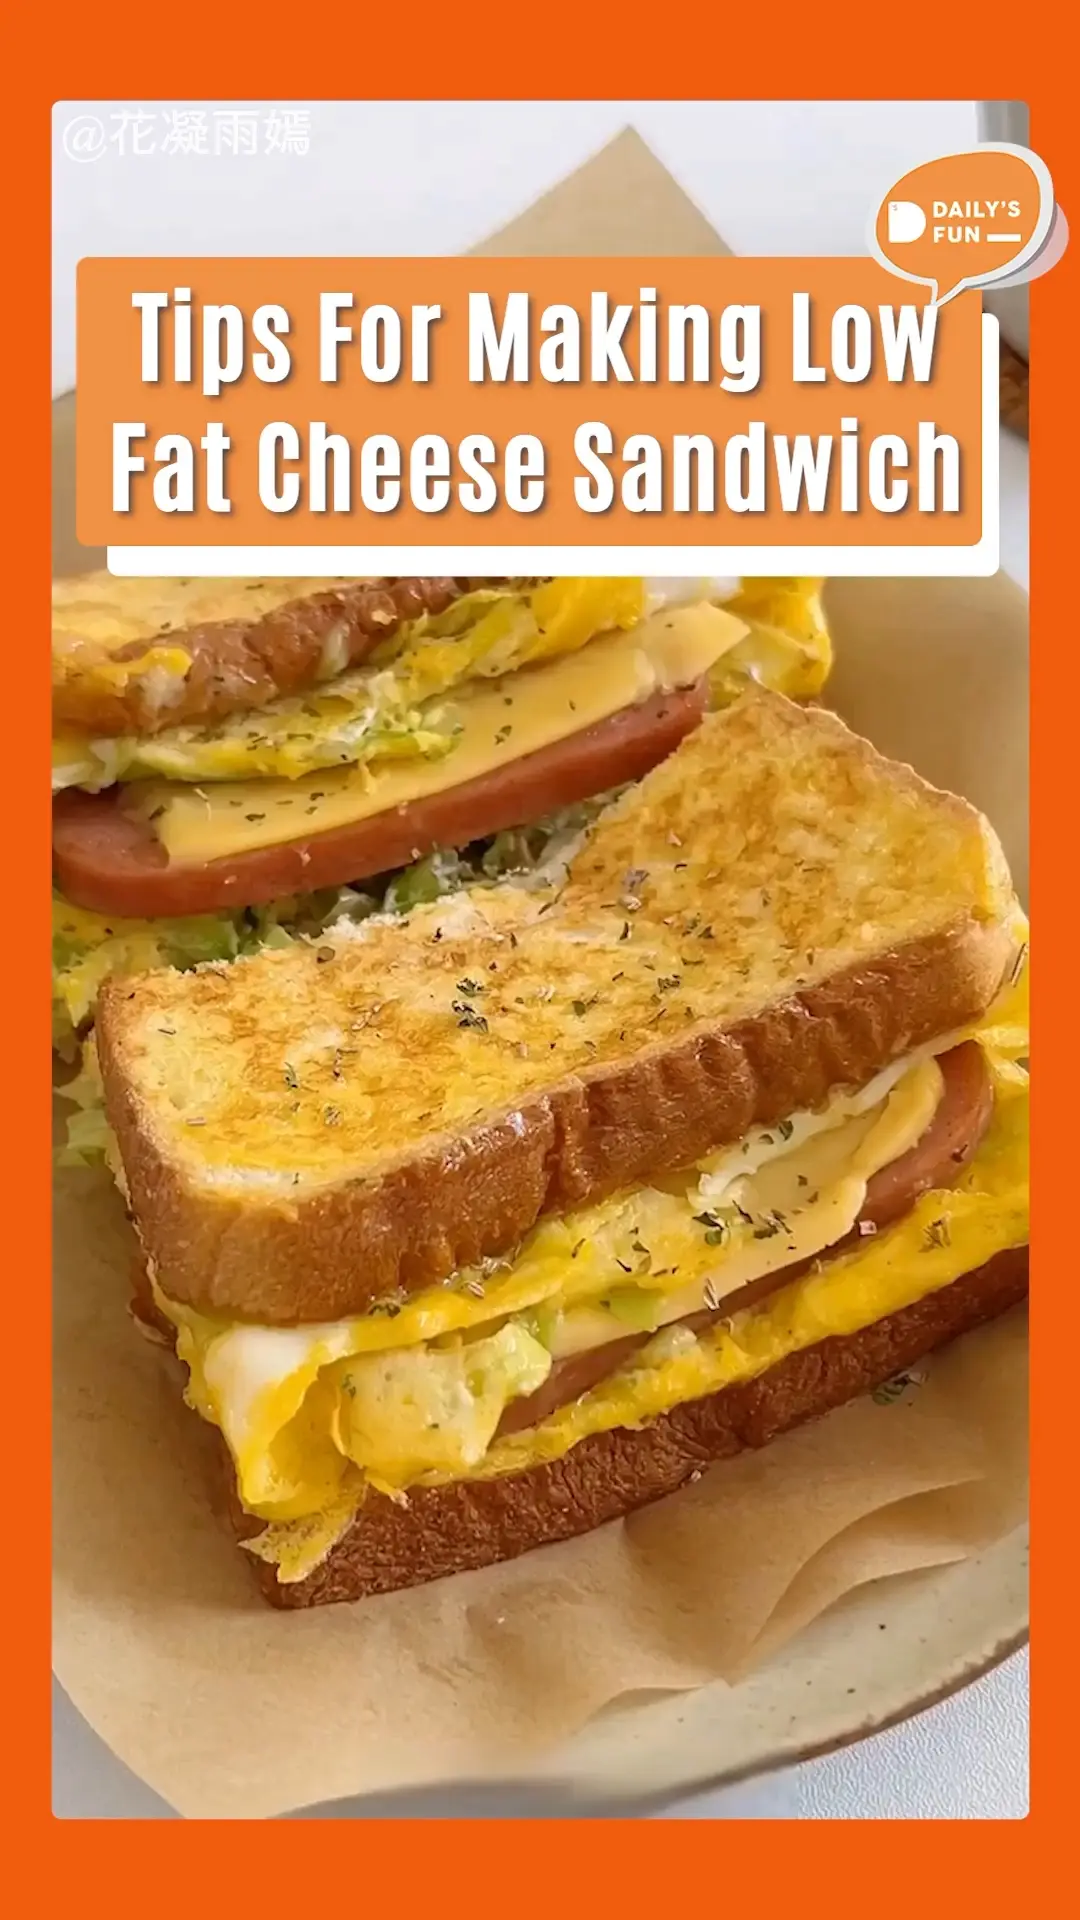 TIPS FOR MAKING LOW FAT CHEESE SANDWICH🥪's images